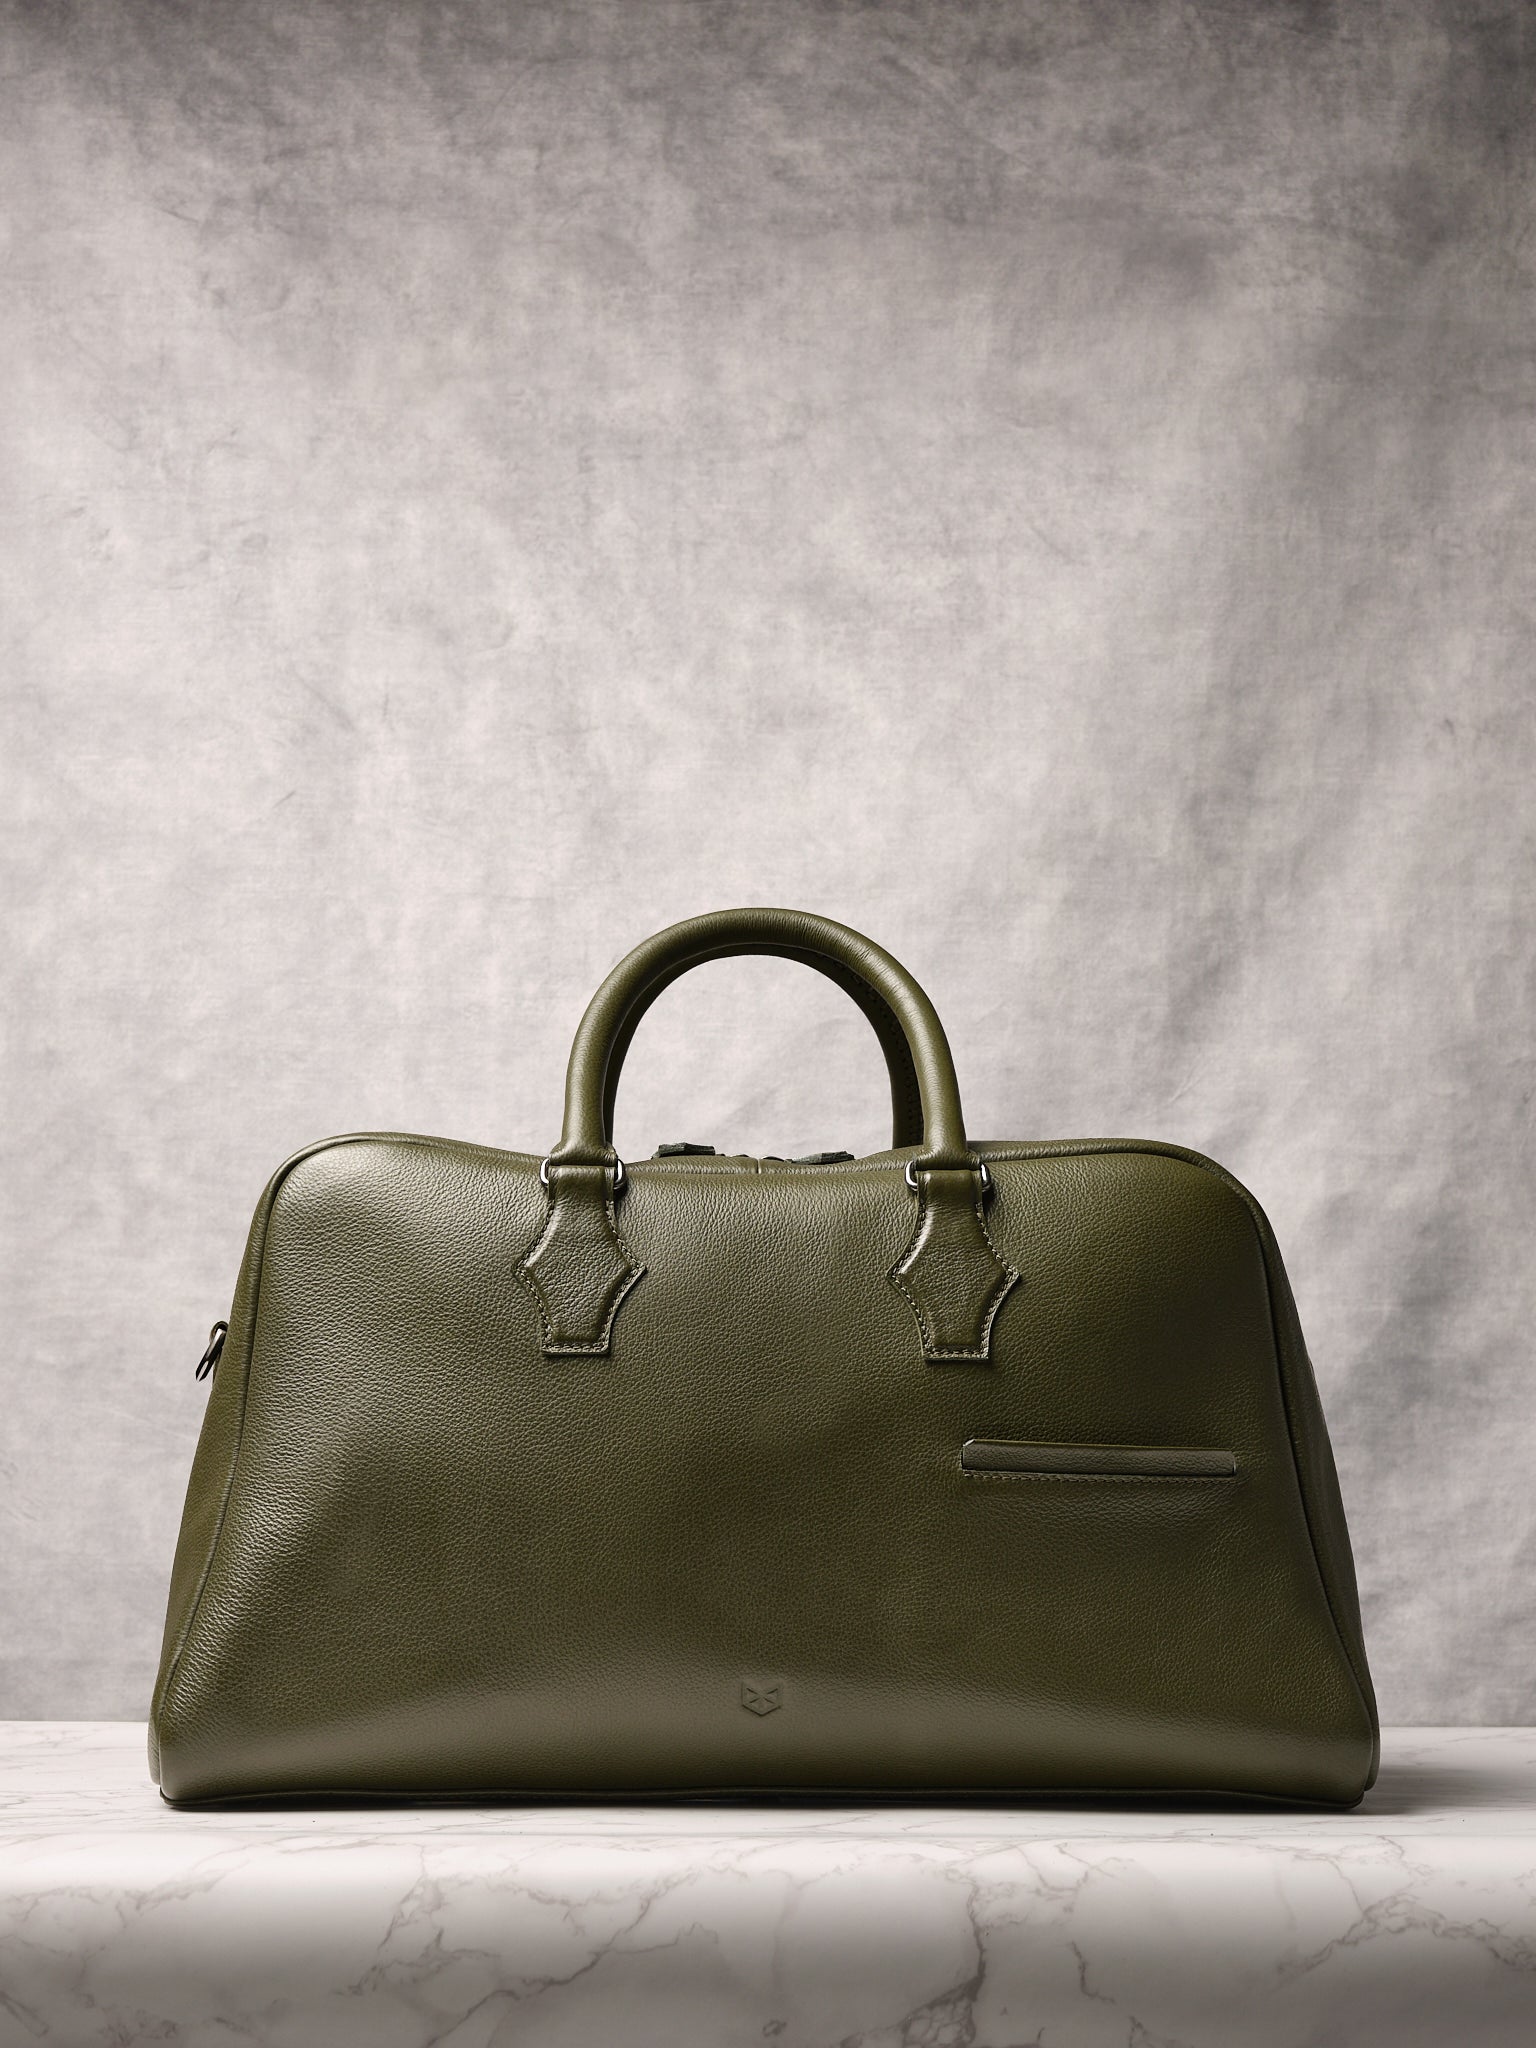 Easy-access Exterior Pocket. Mens Weekend Bags Green by Capra Leather